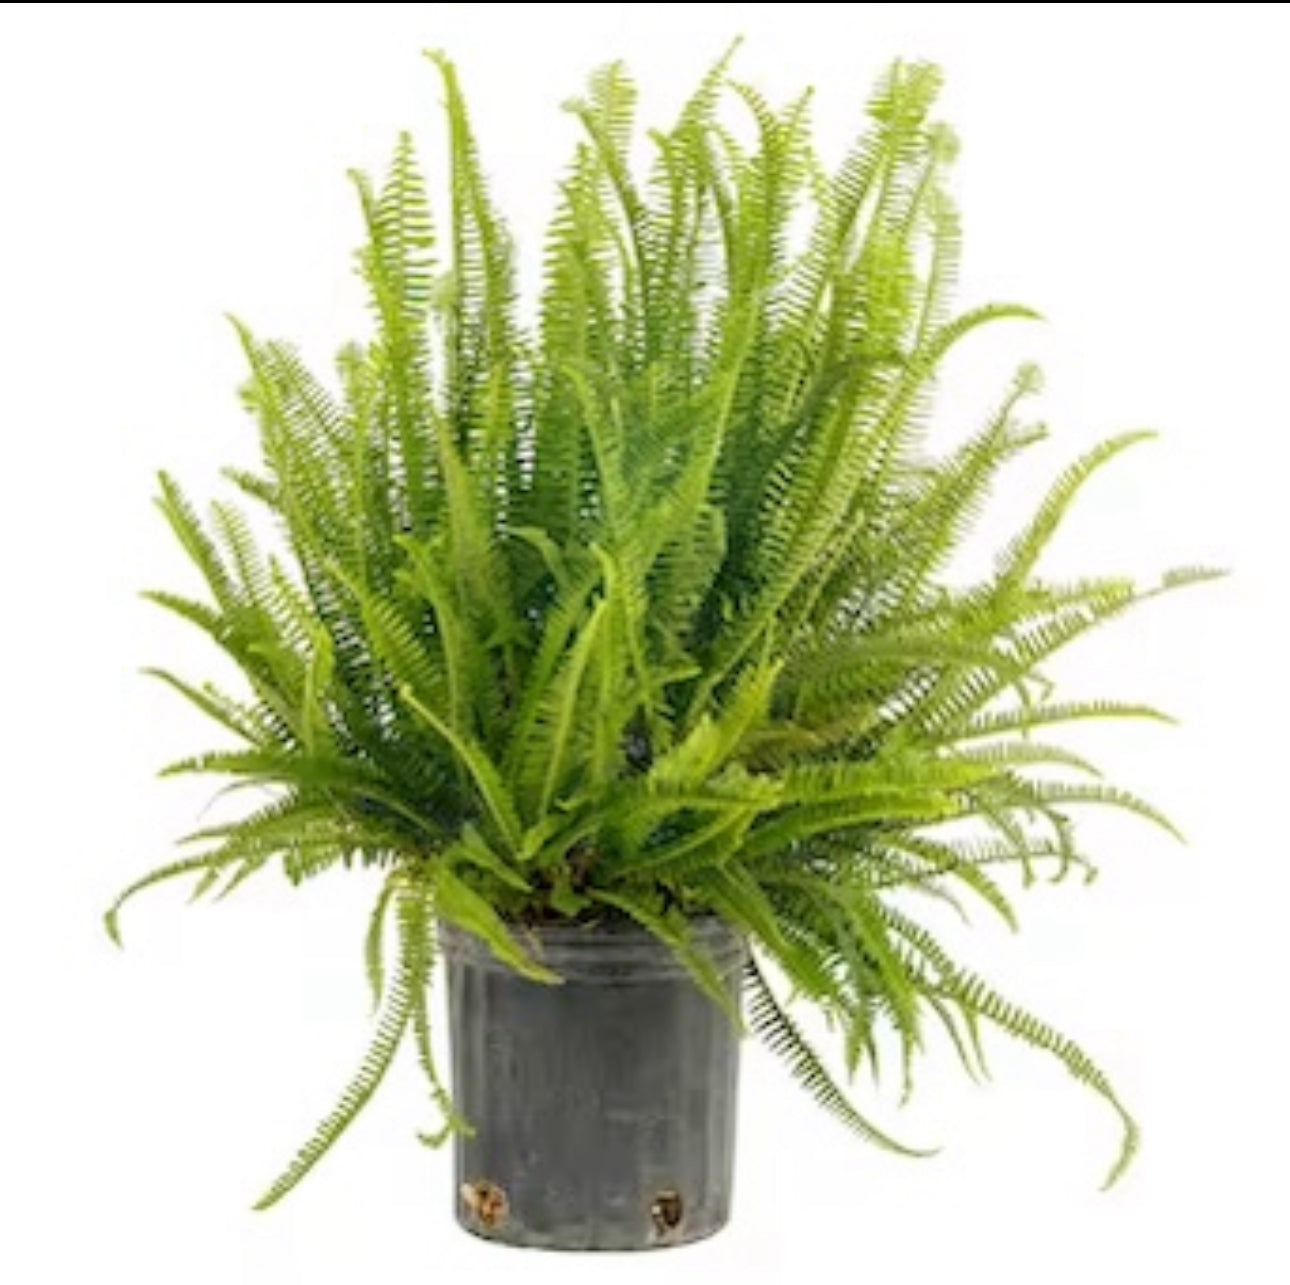 Live Plant-Kimberly Queen Fern Preorder Shipping Week Of May 6th